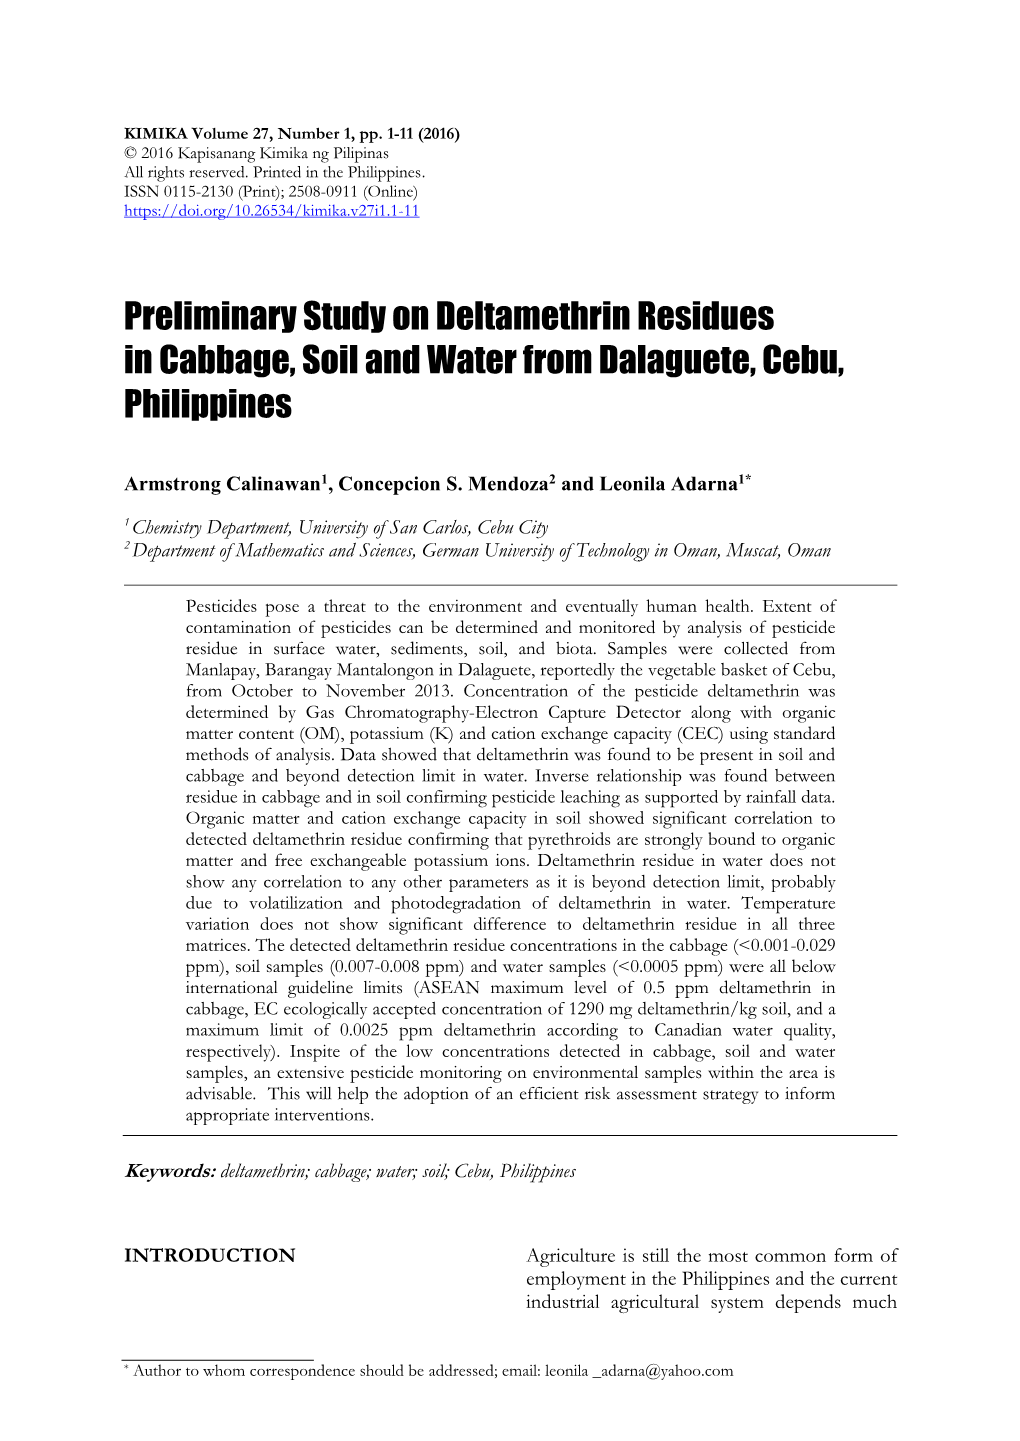 Preliminary Study on Deltamethrin Residues in Cabbage, Soil and Water from Dalaguete, Cebu, Philippines